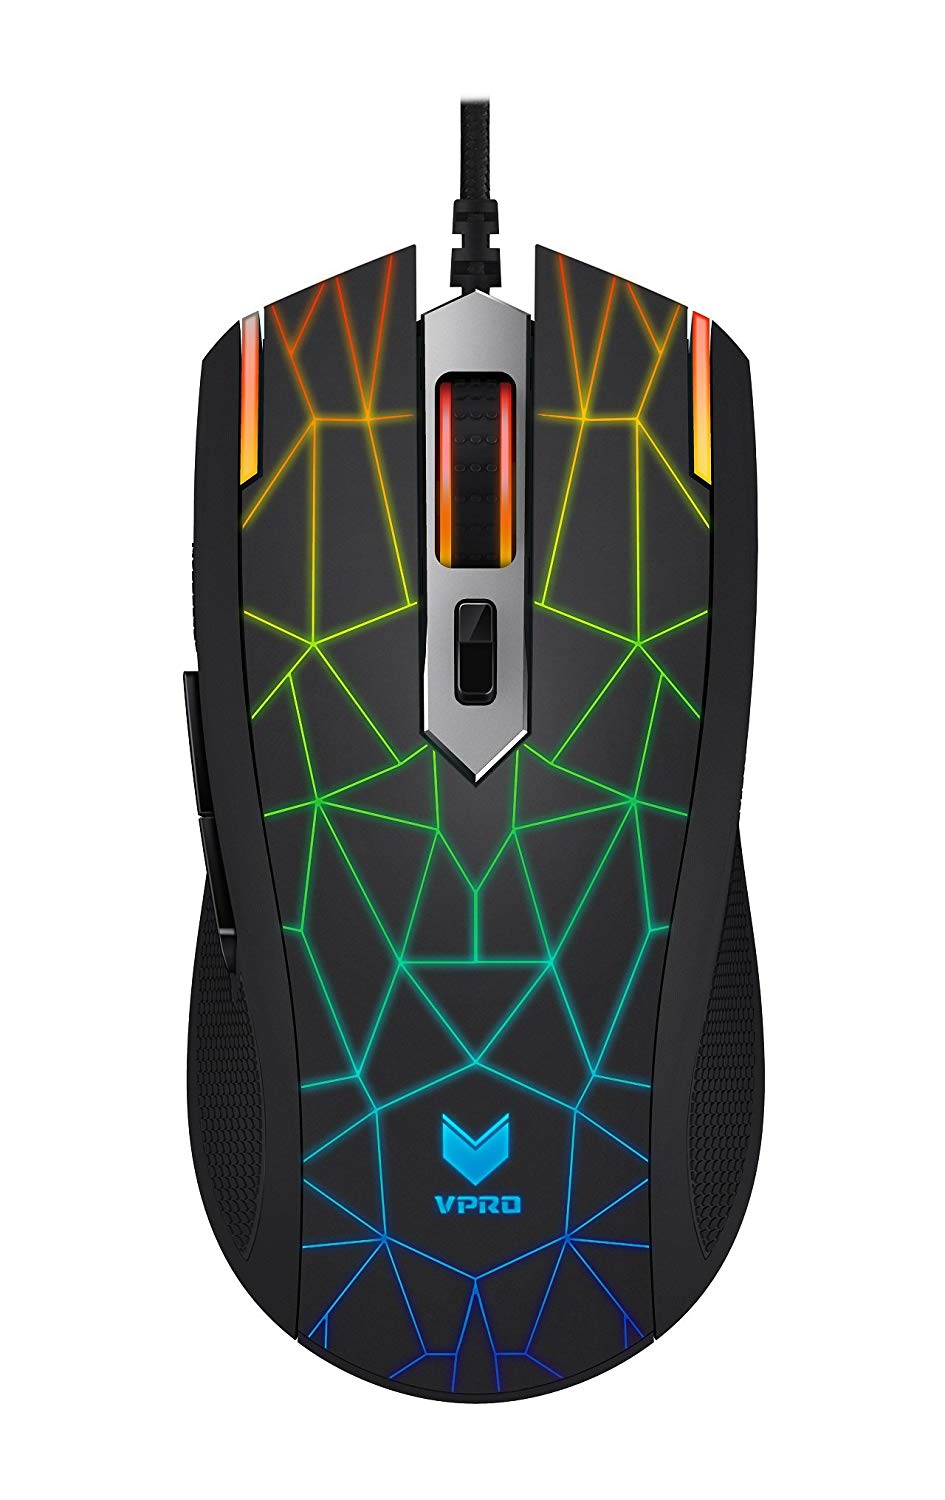 Prolink Fulvus Illuminated Gaming Mouse (PMG9003) in wholesale price